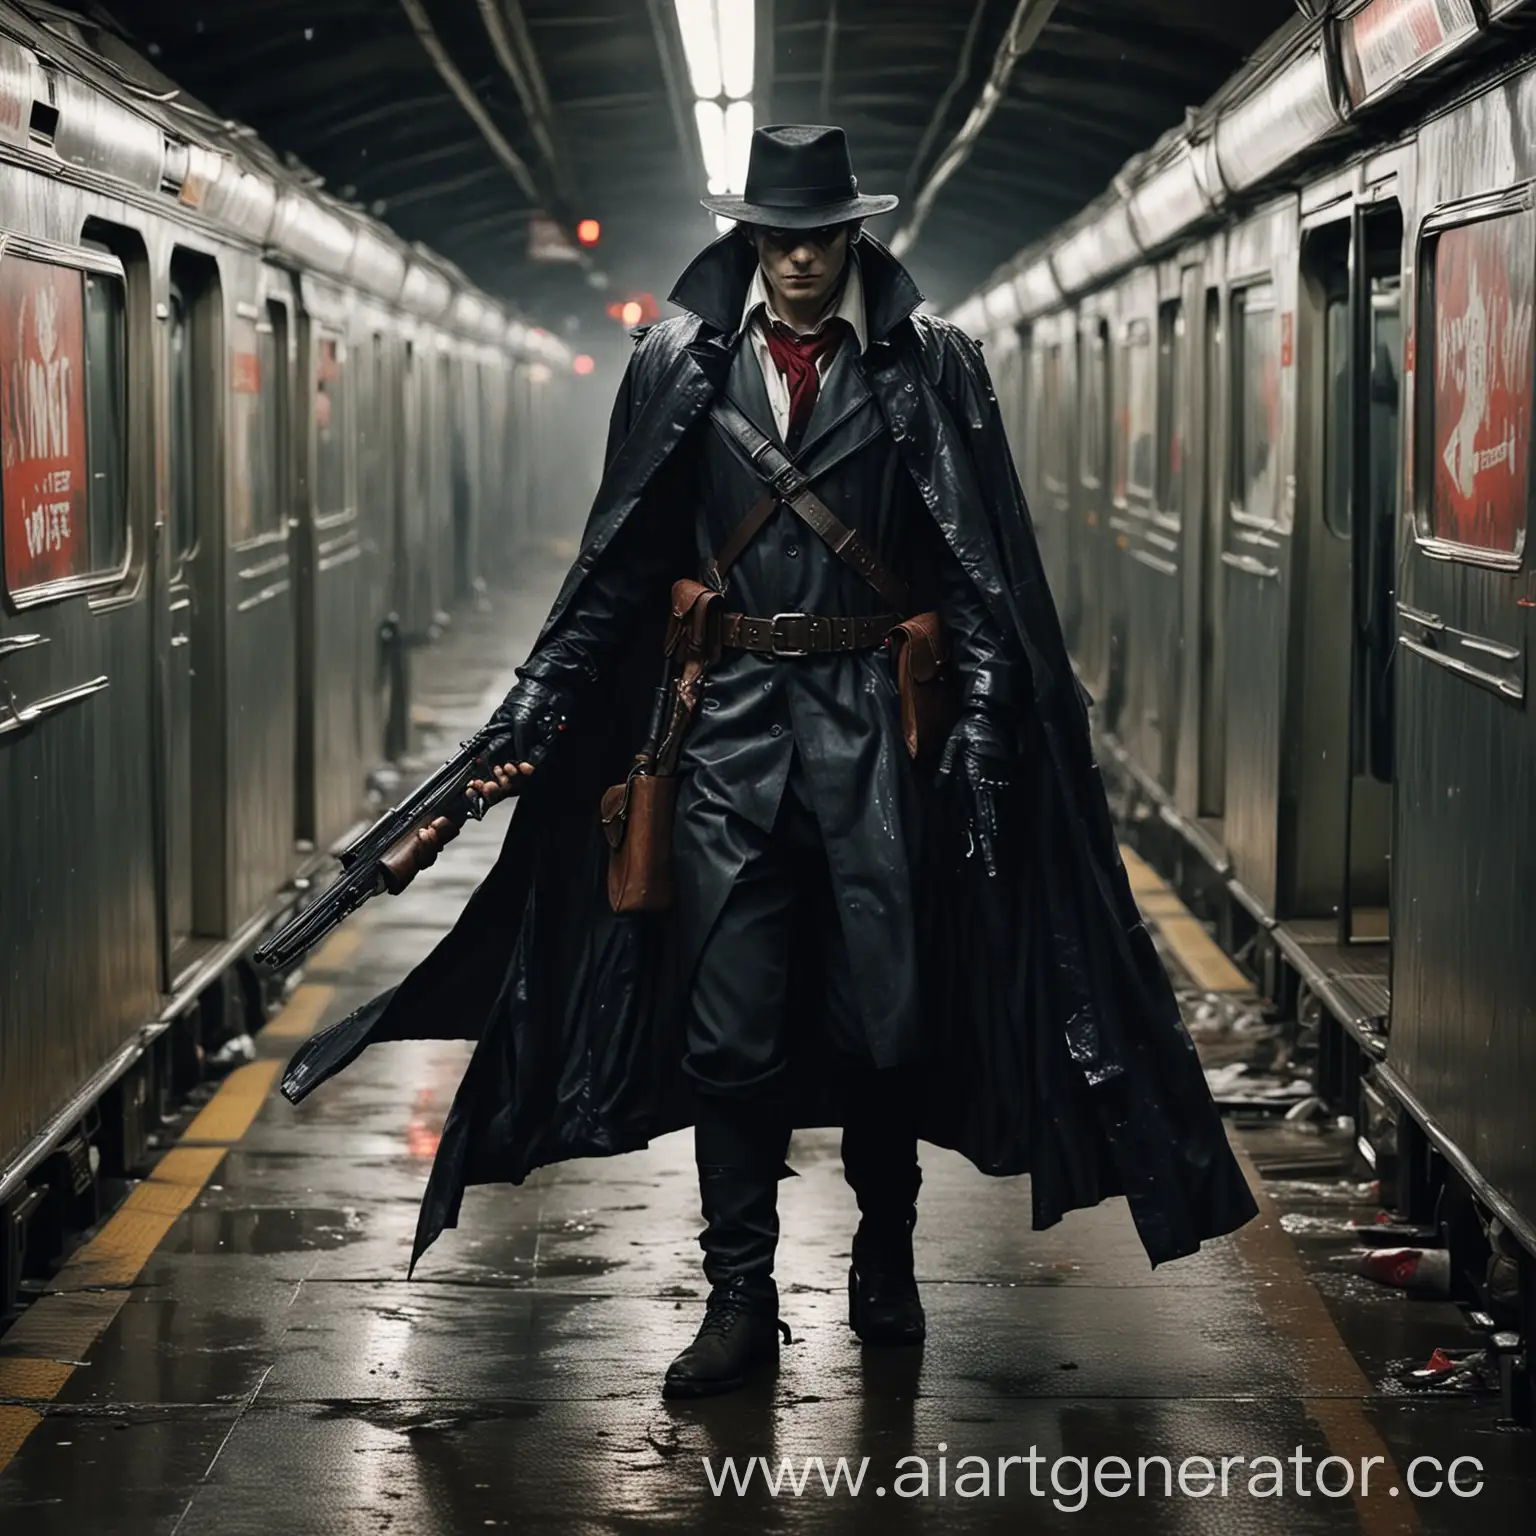 A vampire hunter in a raincoat with two sawn-off shotguns goes hunting in the subway